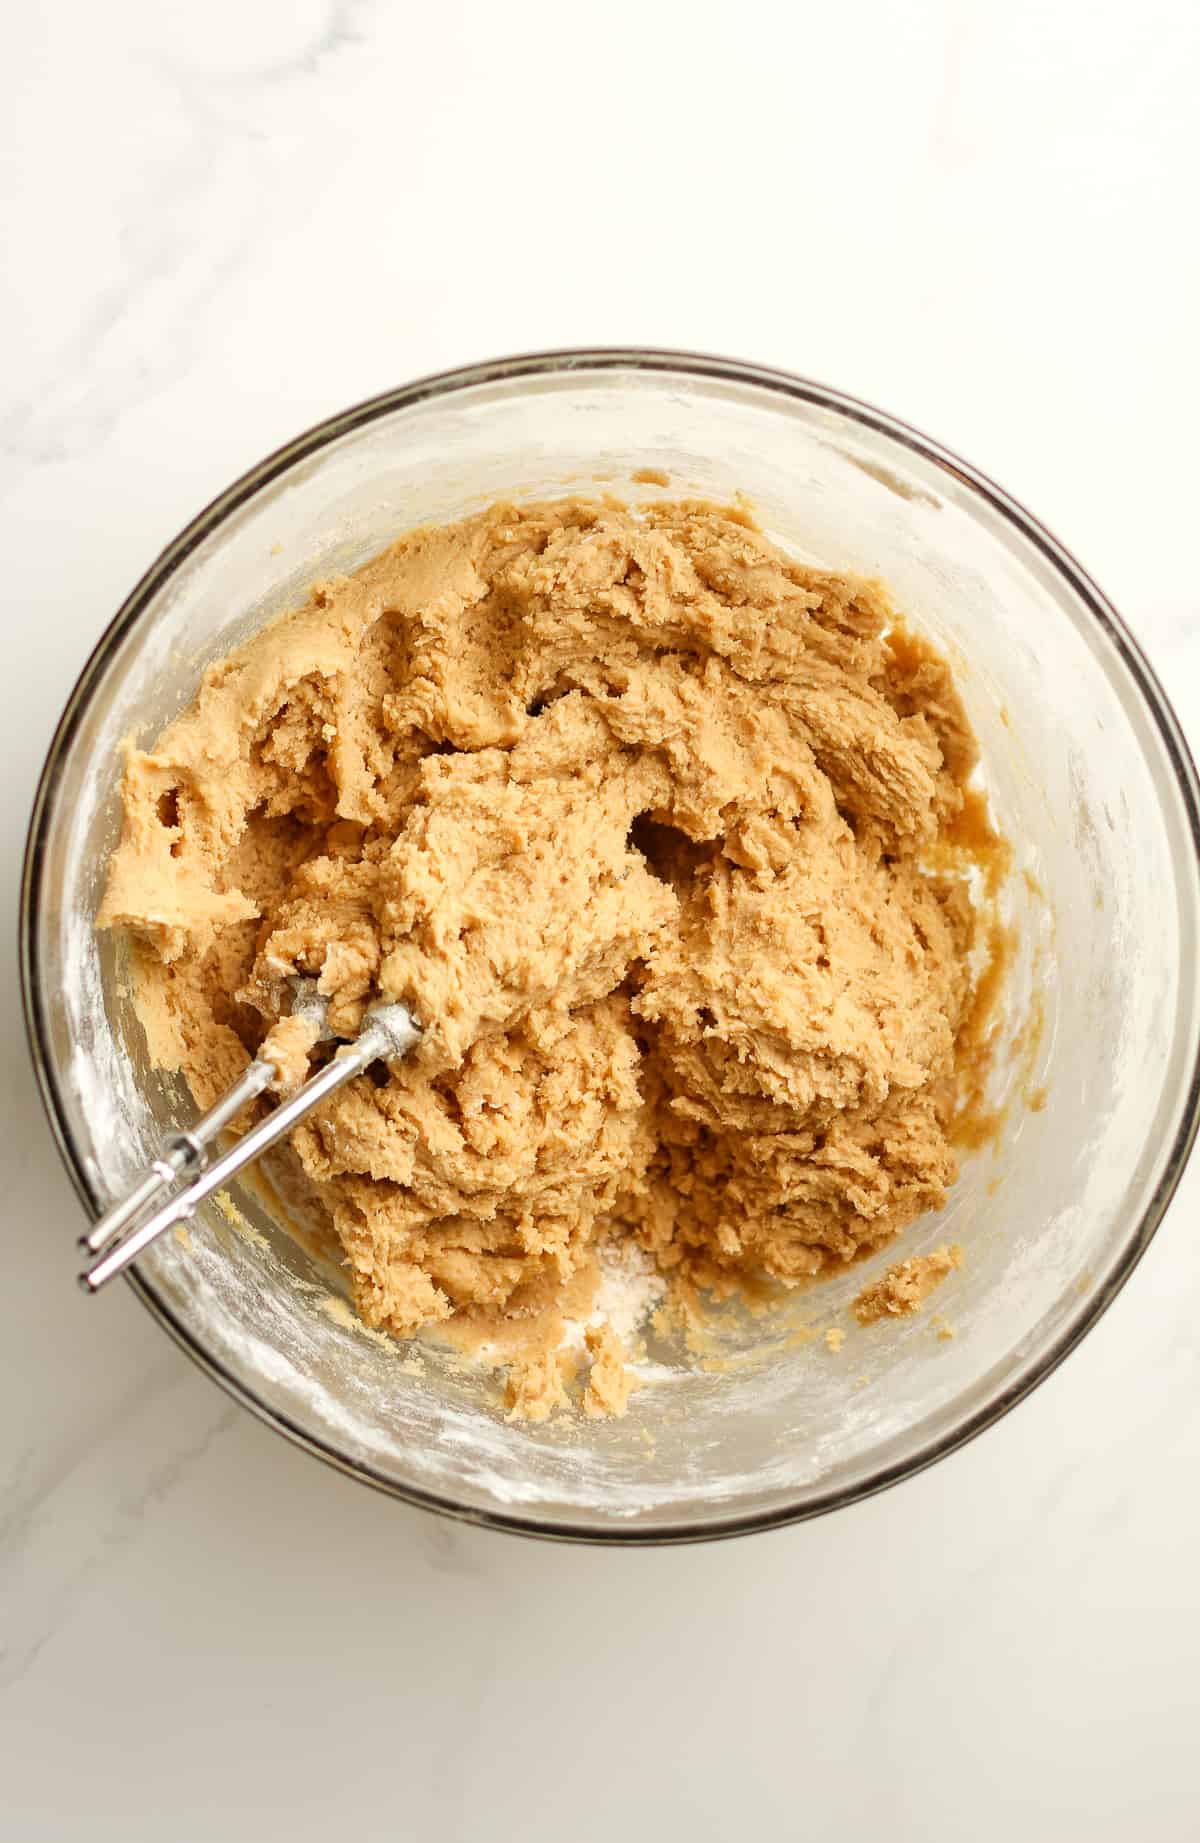 A bowl of the peanut butter cookie dough.